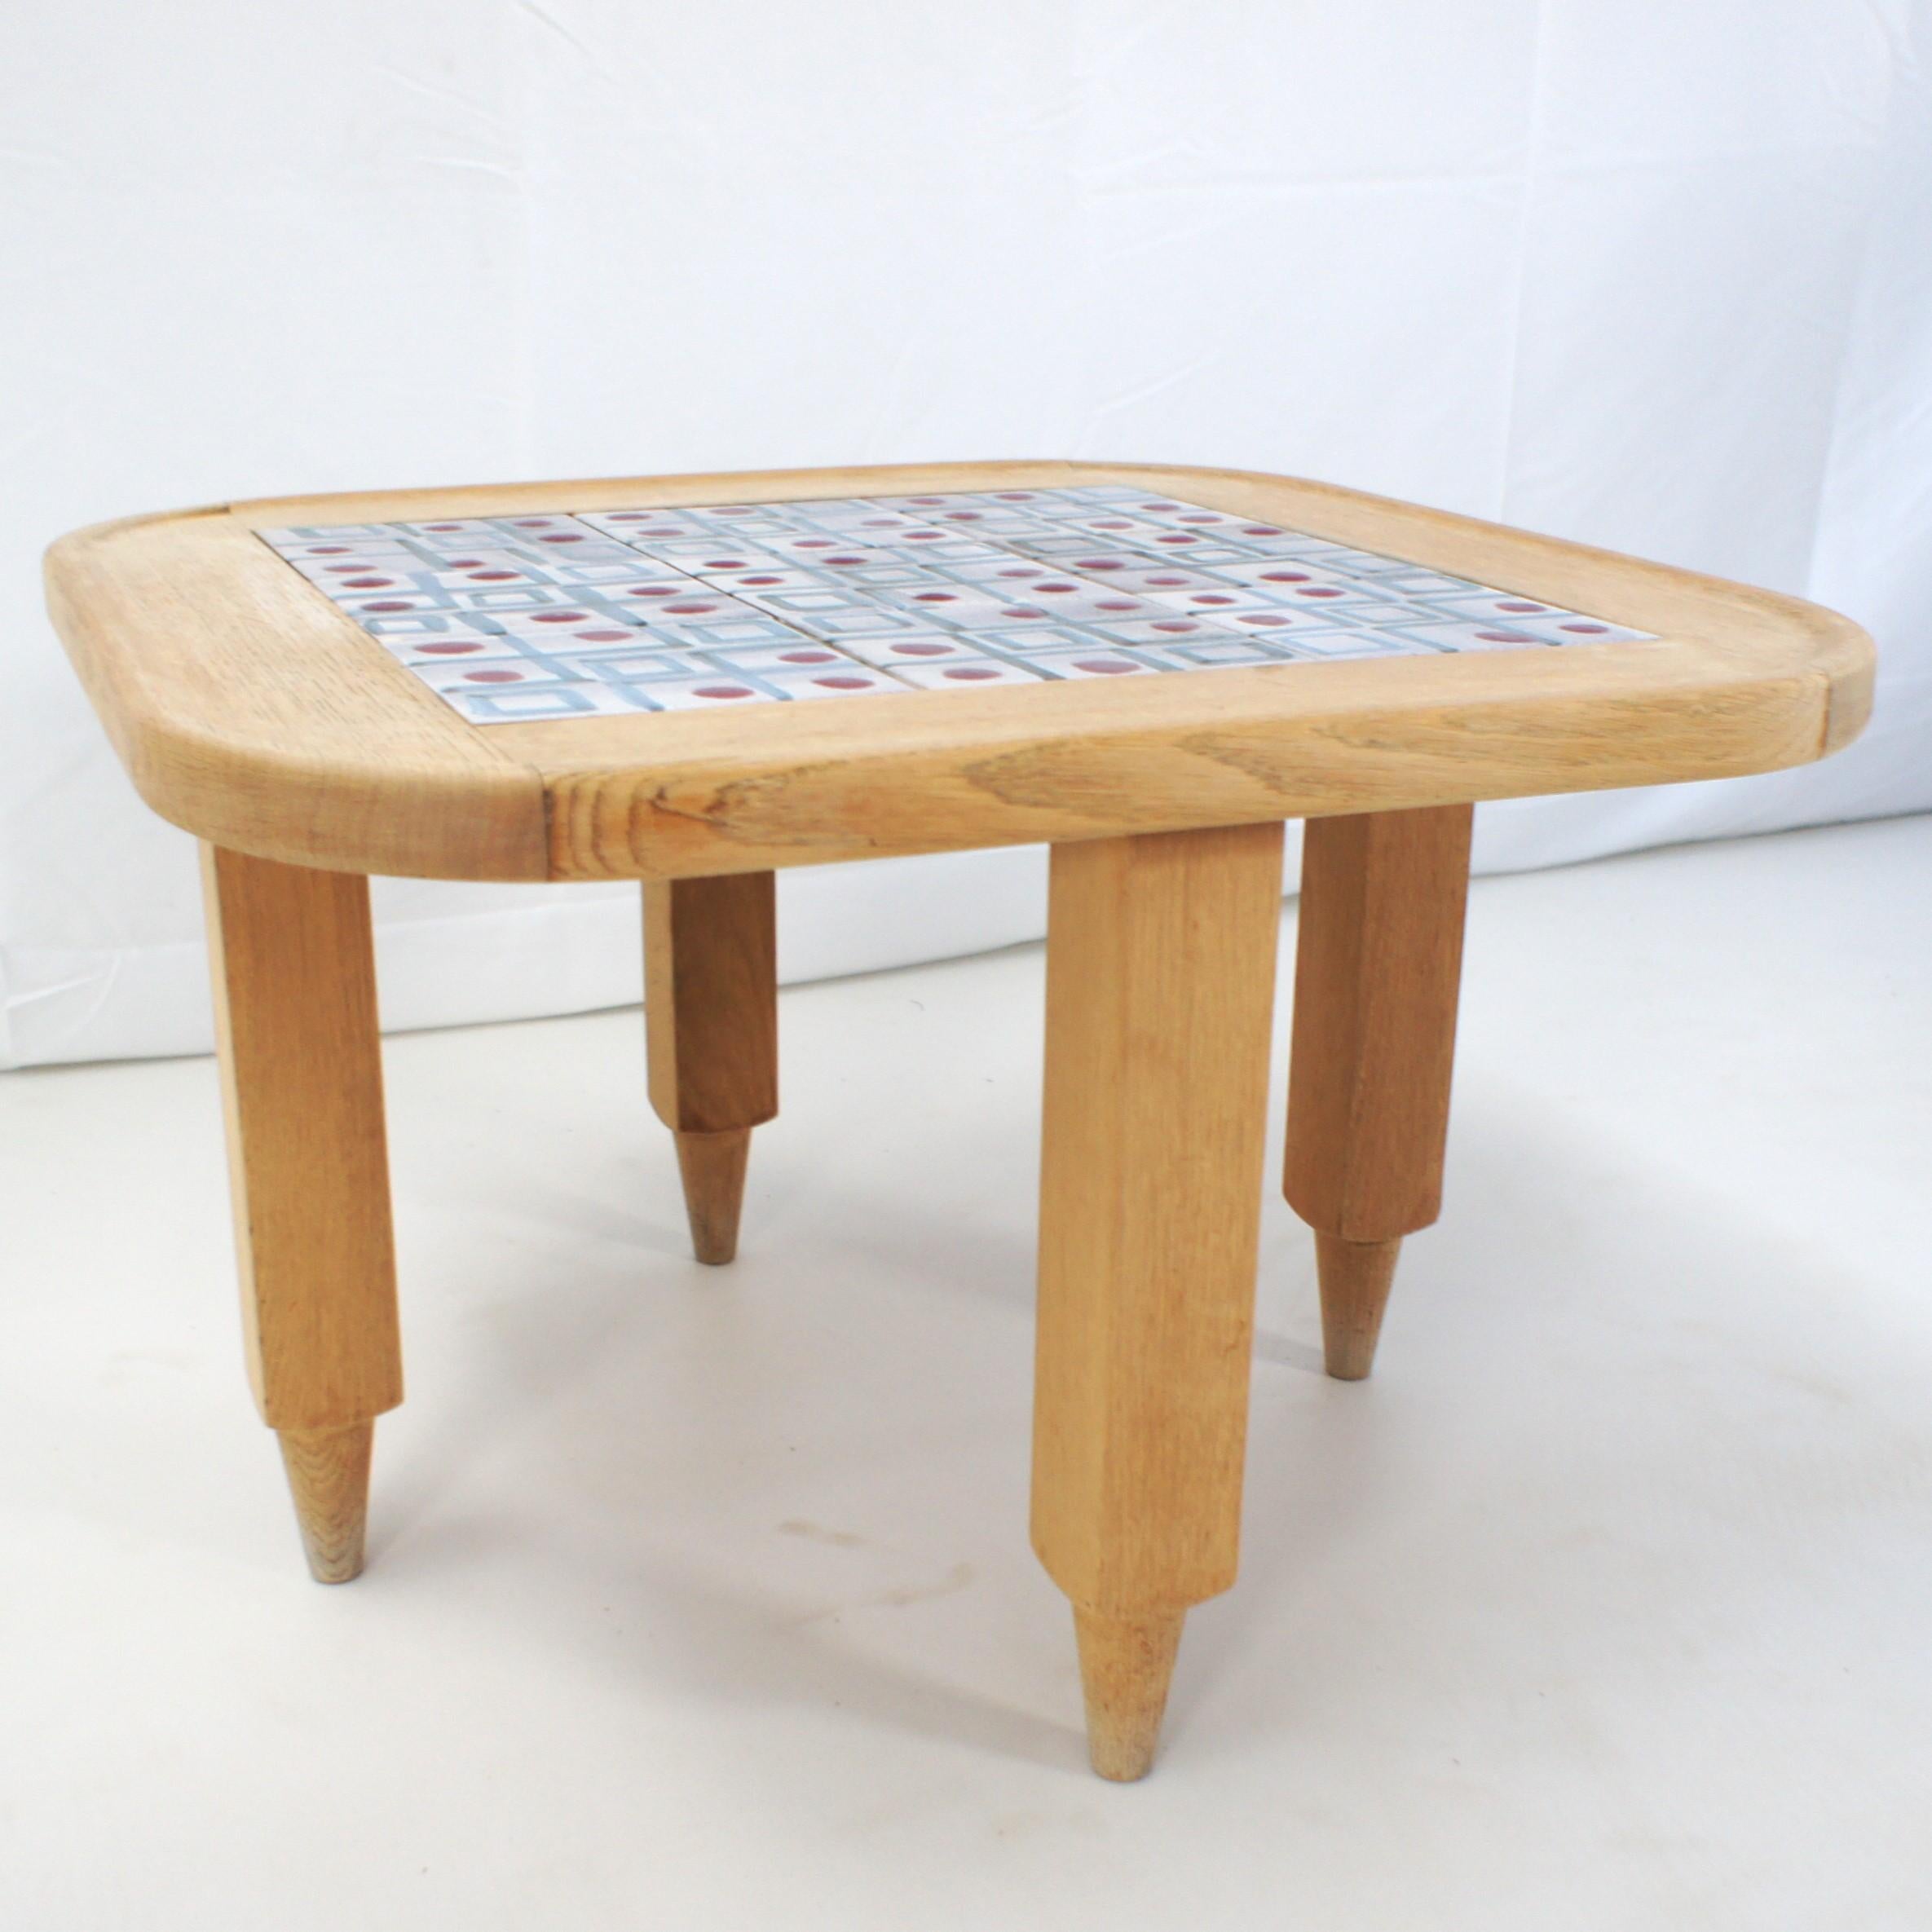 Very nice light oak and ceramics coffee table by Guillerme et Chambron.